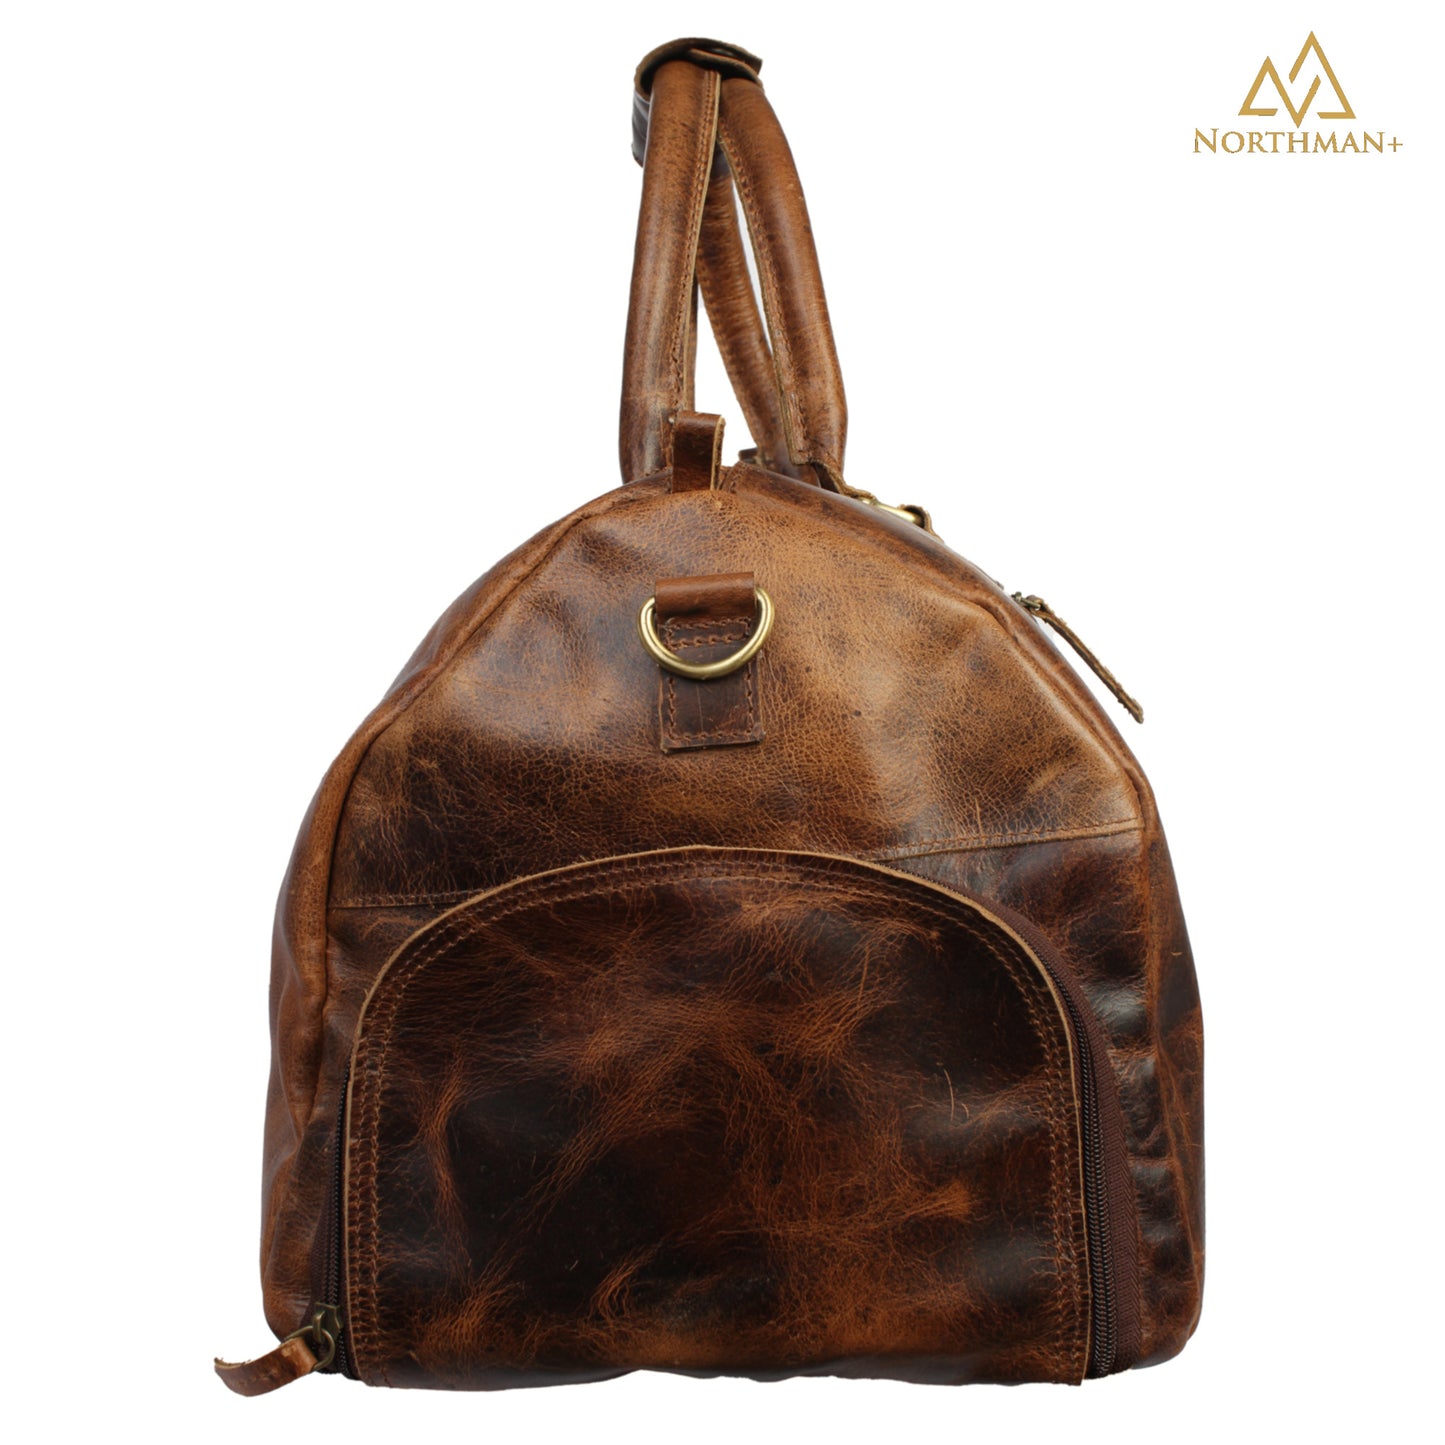 Leather Duffle Bag in Brown with dedicated pocket for Shoes